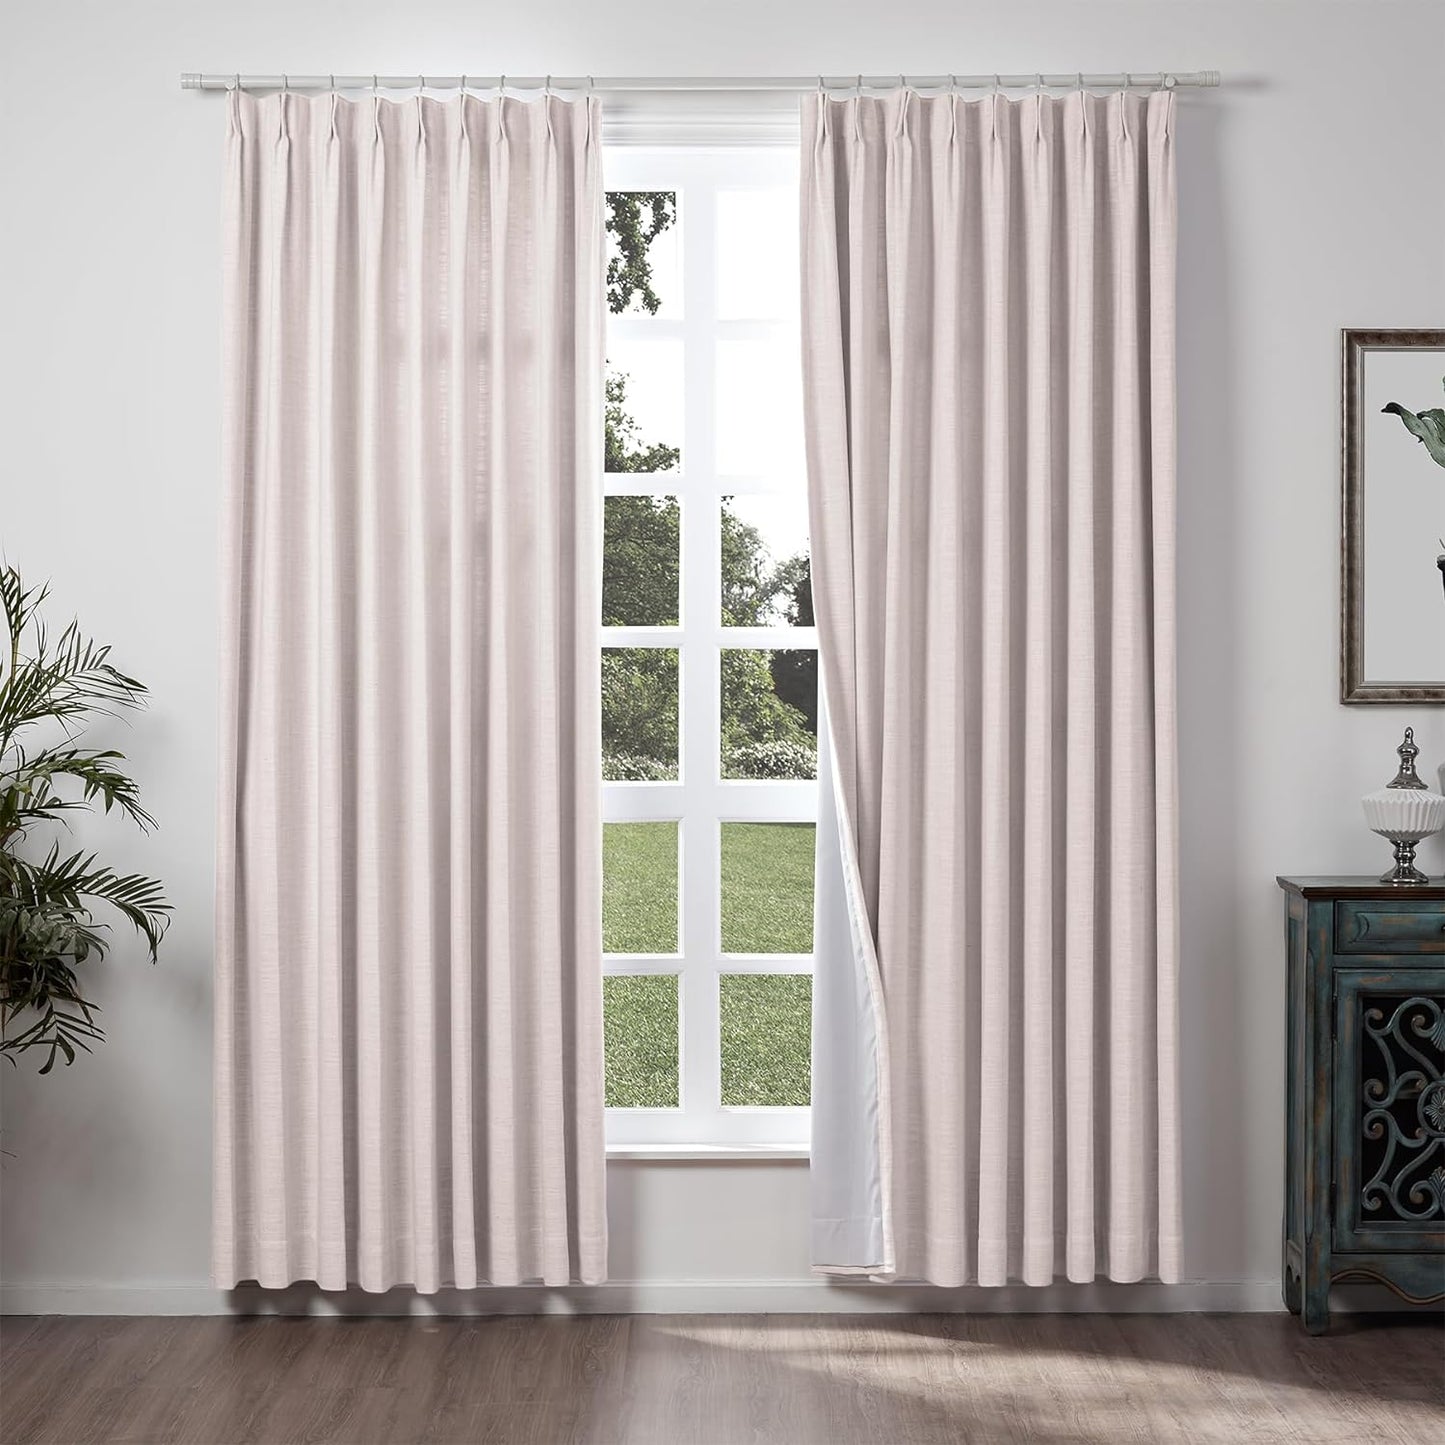 Chadmade 50" W X 63" L Polyester Linen Drape with Blackout Lining Pinch Pleat Curtain for Sliding Door Patio Door Living Room Bedroom, (1 Panel) Sand Beige Tallis Collection  ChadMade Pink Lemonade (19) 100Wx96L 